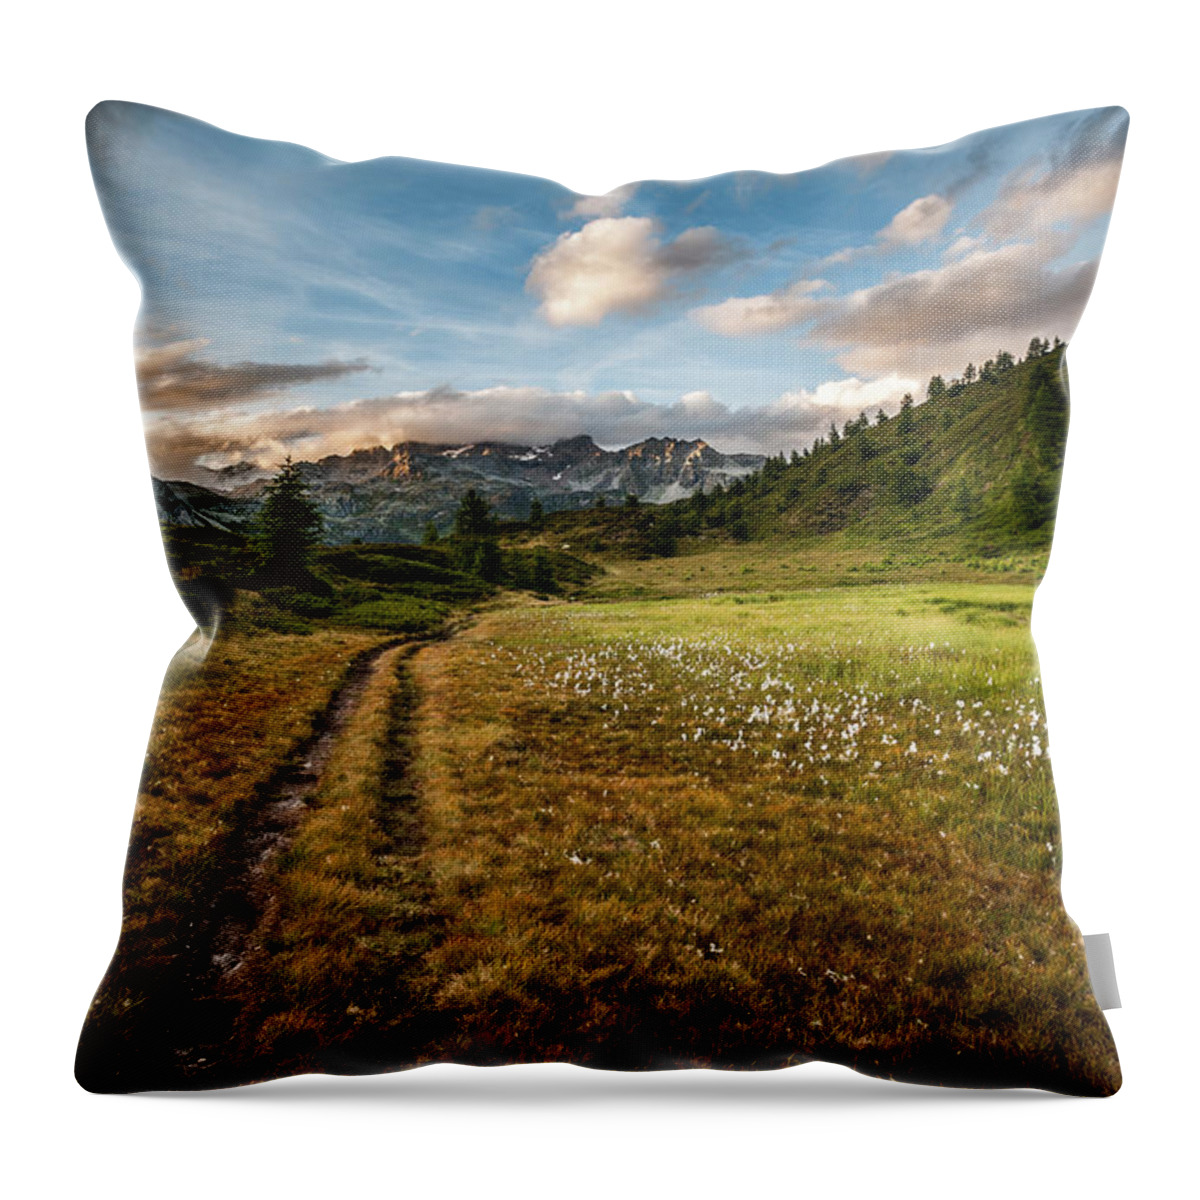 Horizontal Throw Pillow featuring the photograph Landscpe Of Muontains In Devero Natural by Paolo Sartori